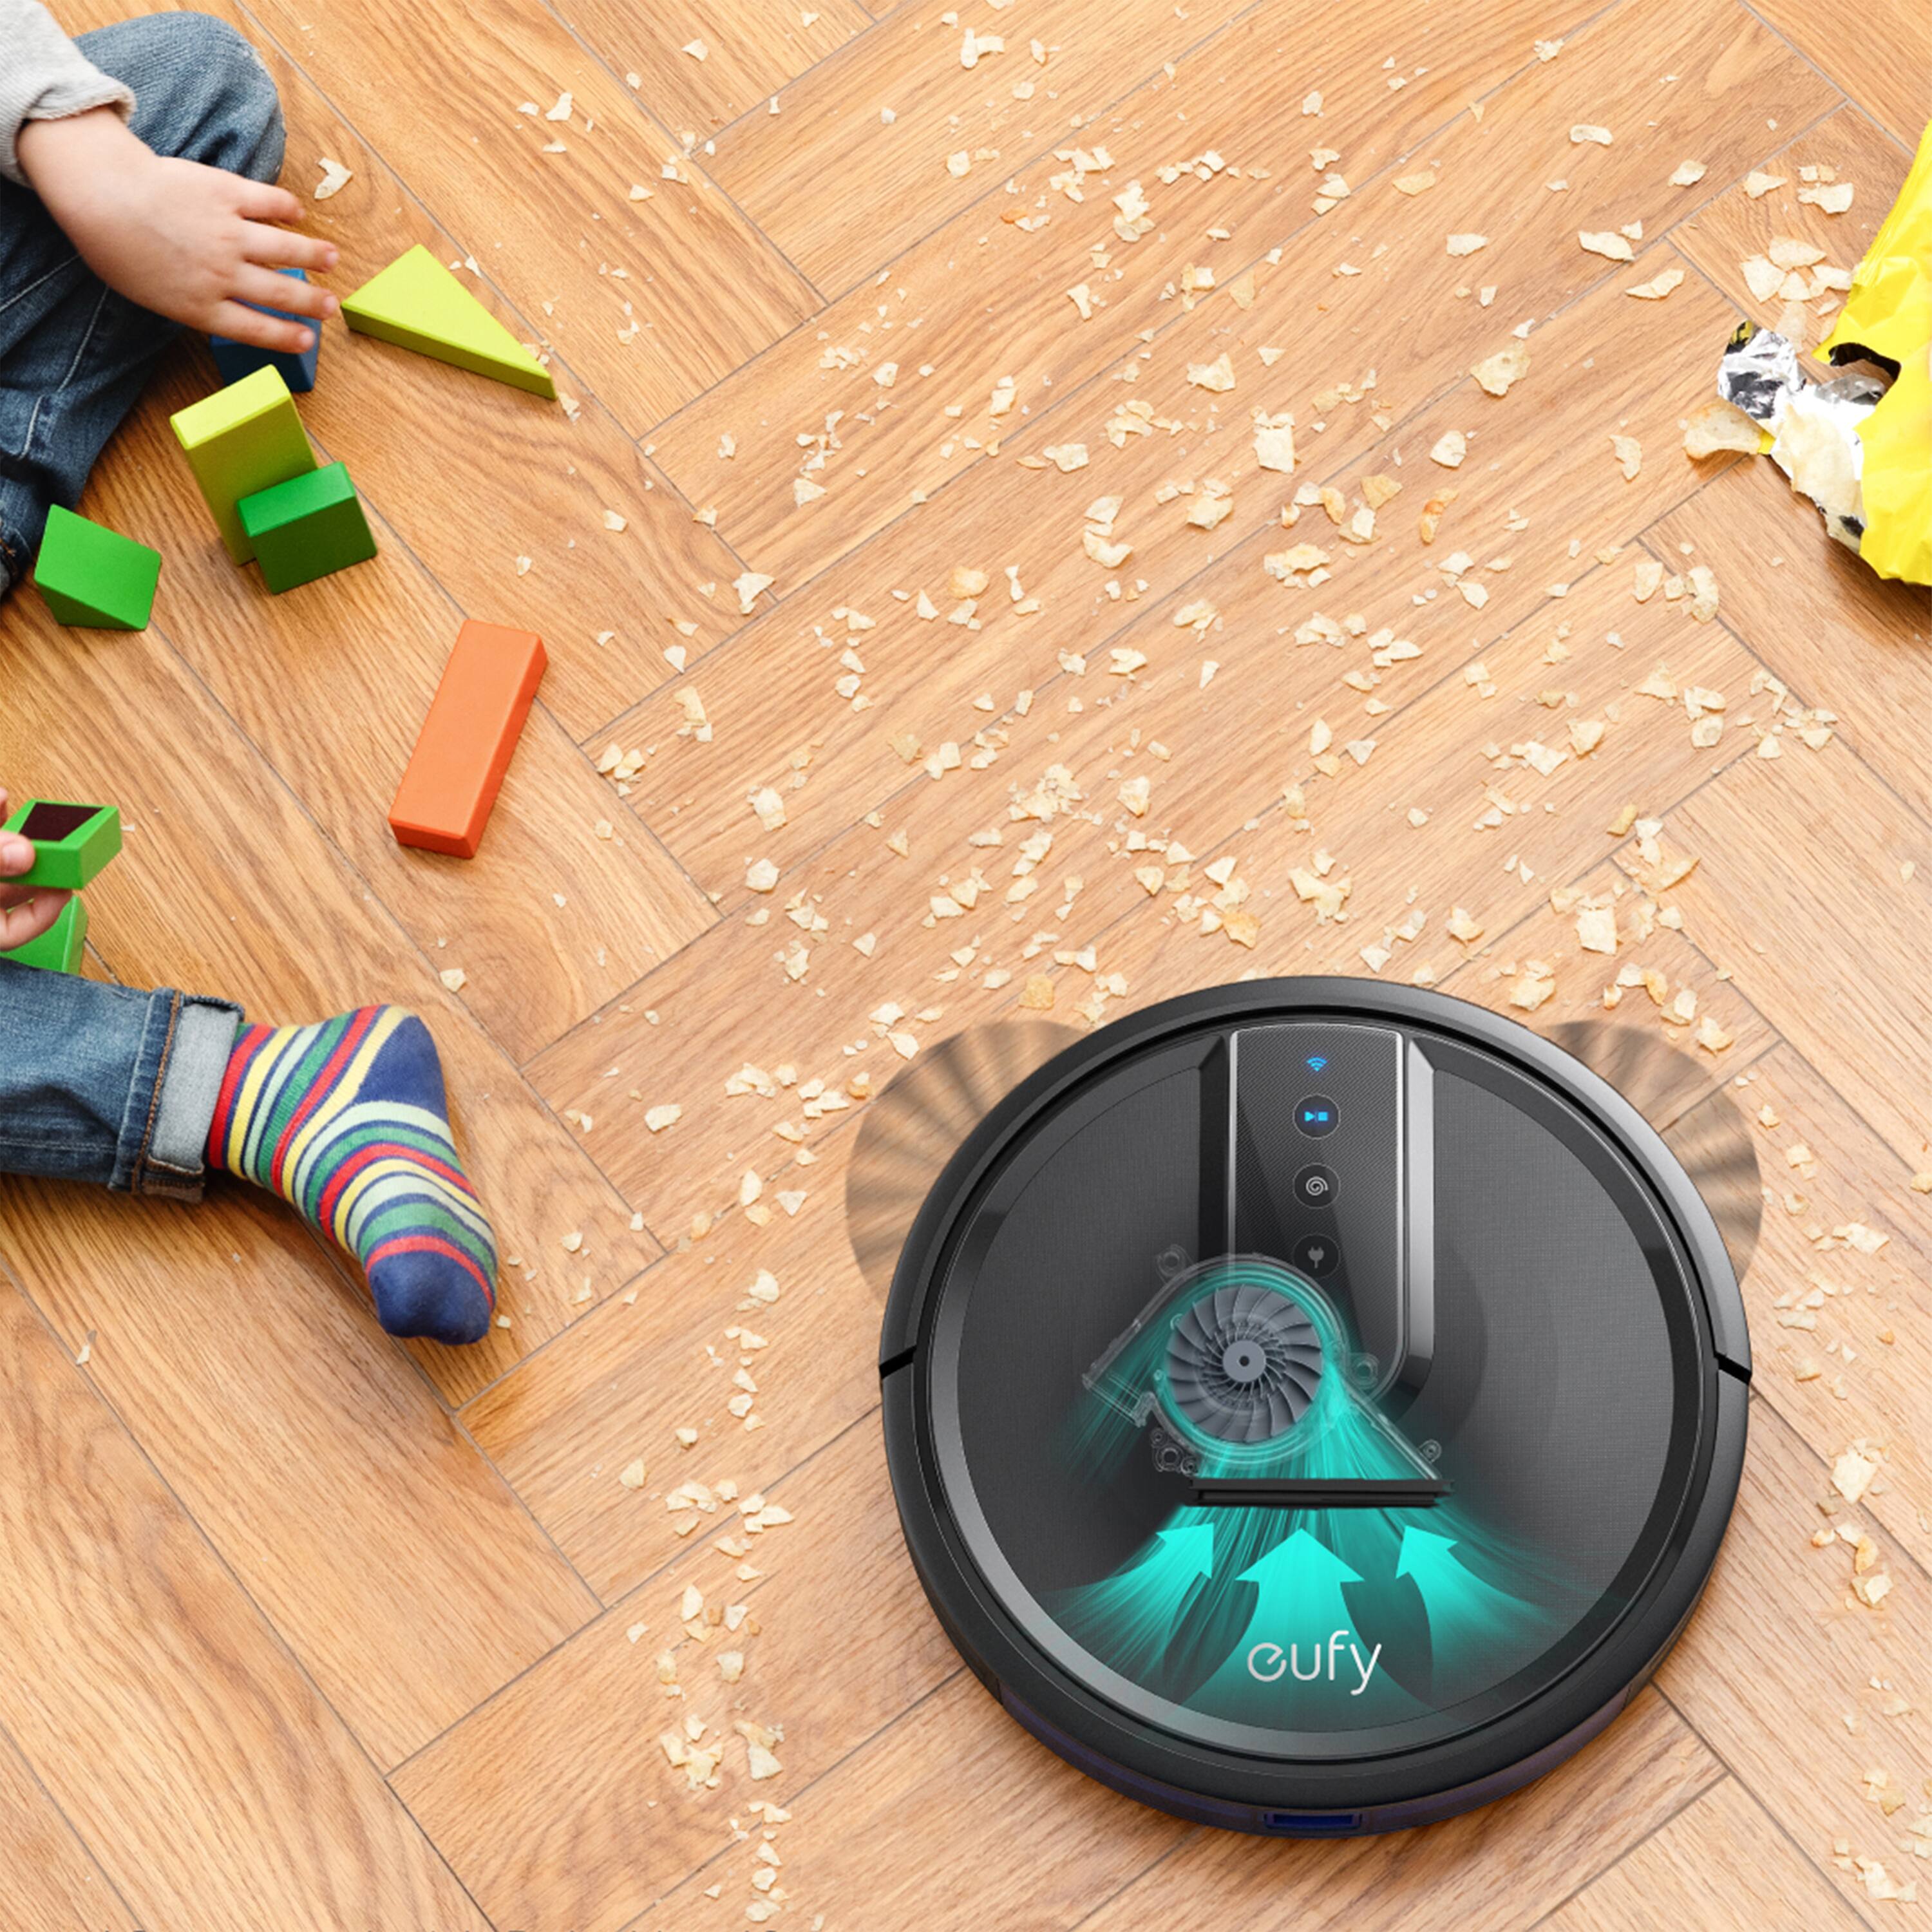 Walmart: Eufy Robovac 35C - the Robot Vacuum Cleaner with Wi-Fi and Strong Suction $149.00 + FS